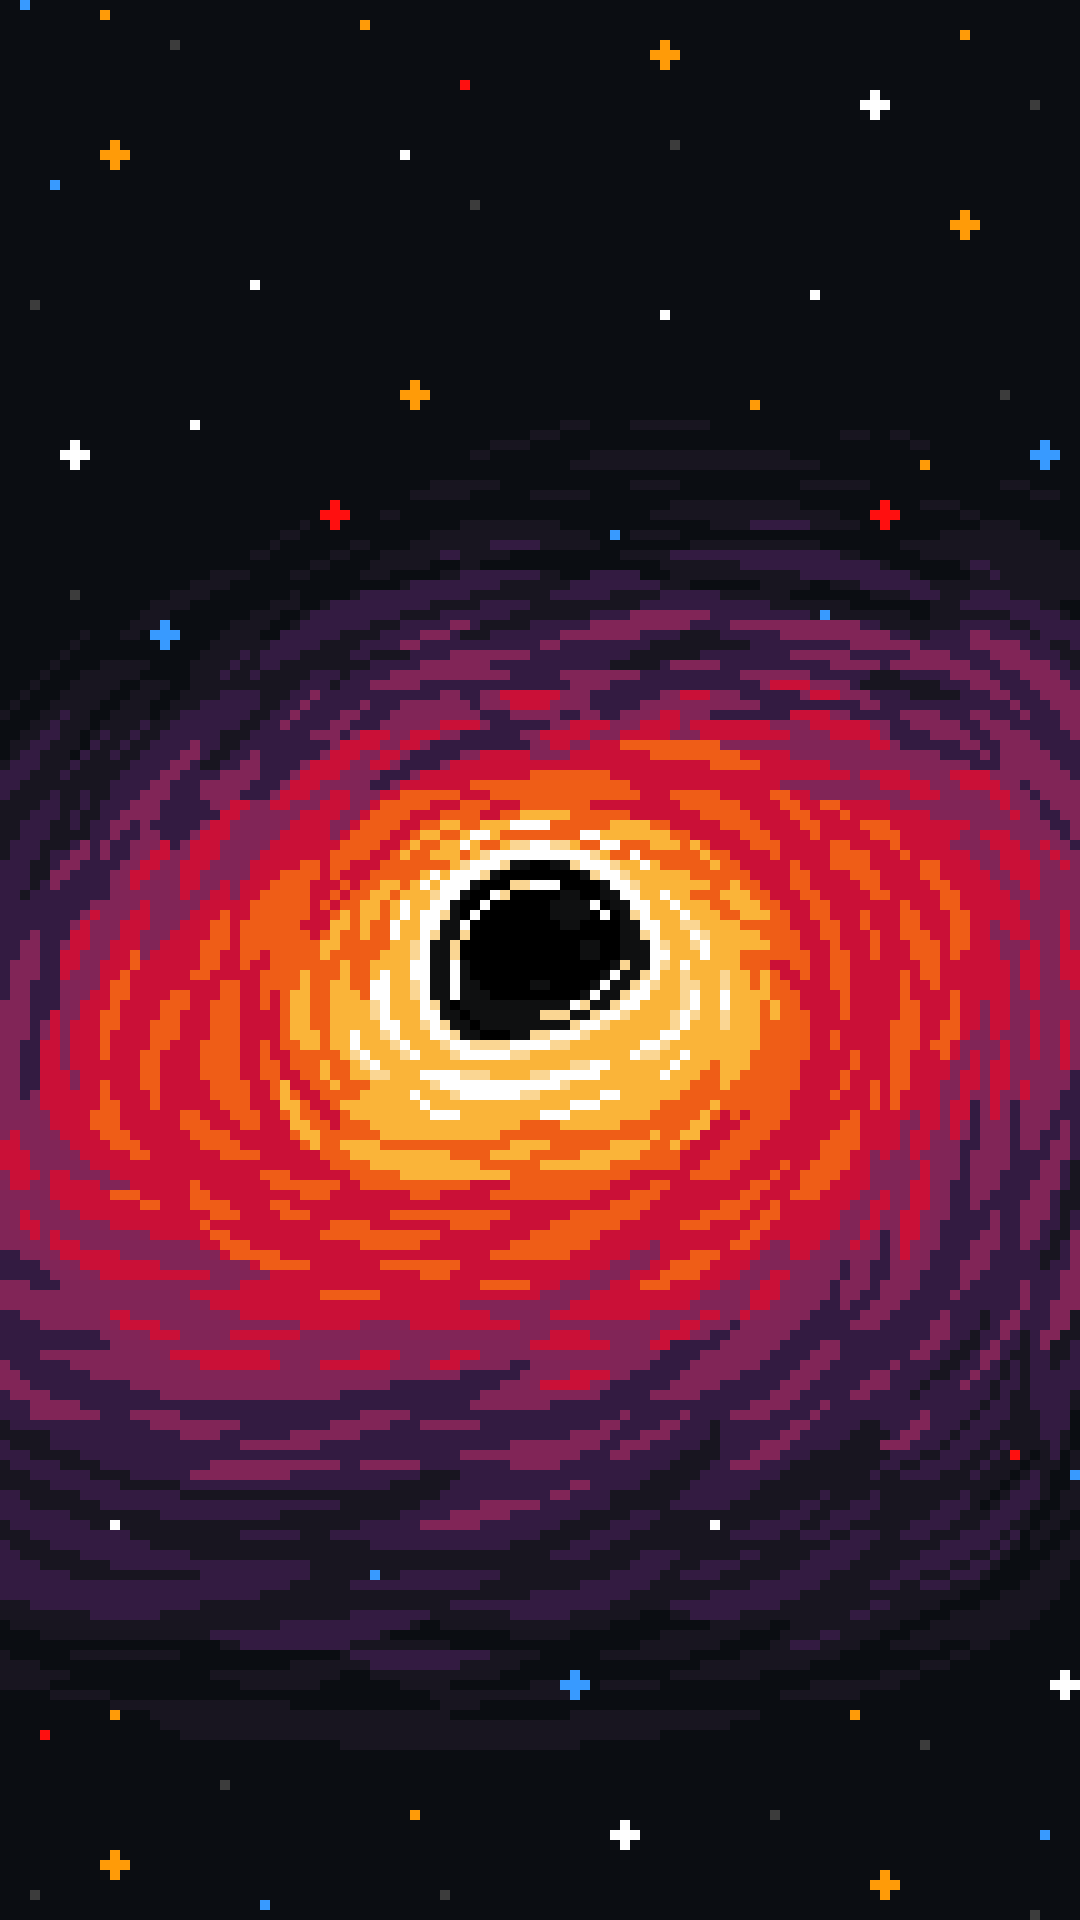 ⭐️Free⭐️ Mobile Wallpaper The Black Hole - Tabsky's Ko-fi Shop - Ko-fi ❤️  Where creators get support from fans through donations, memberships, shop  sales and more! The original 'Buy Me a Coffee